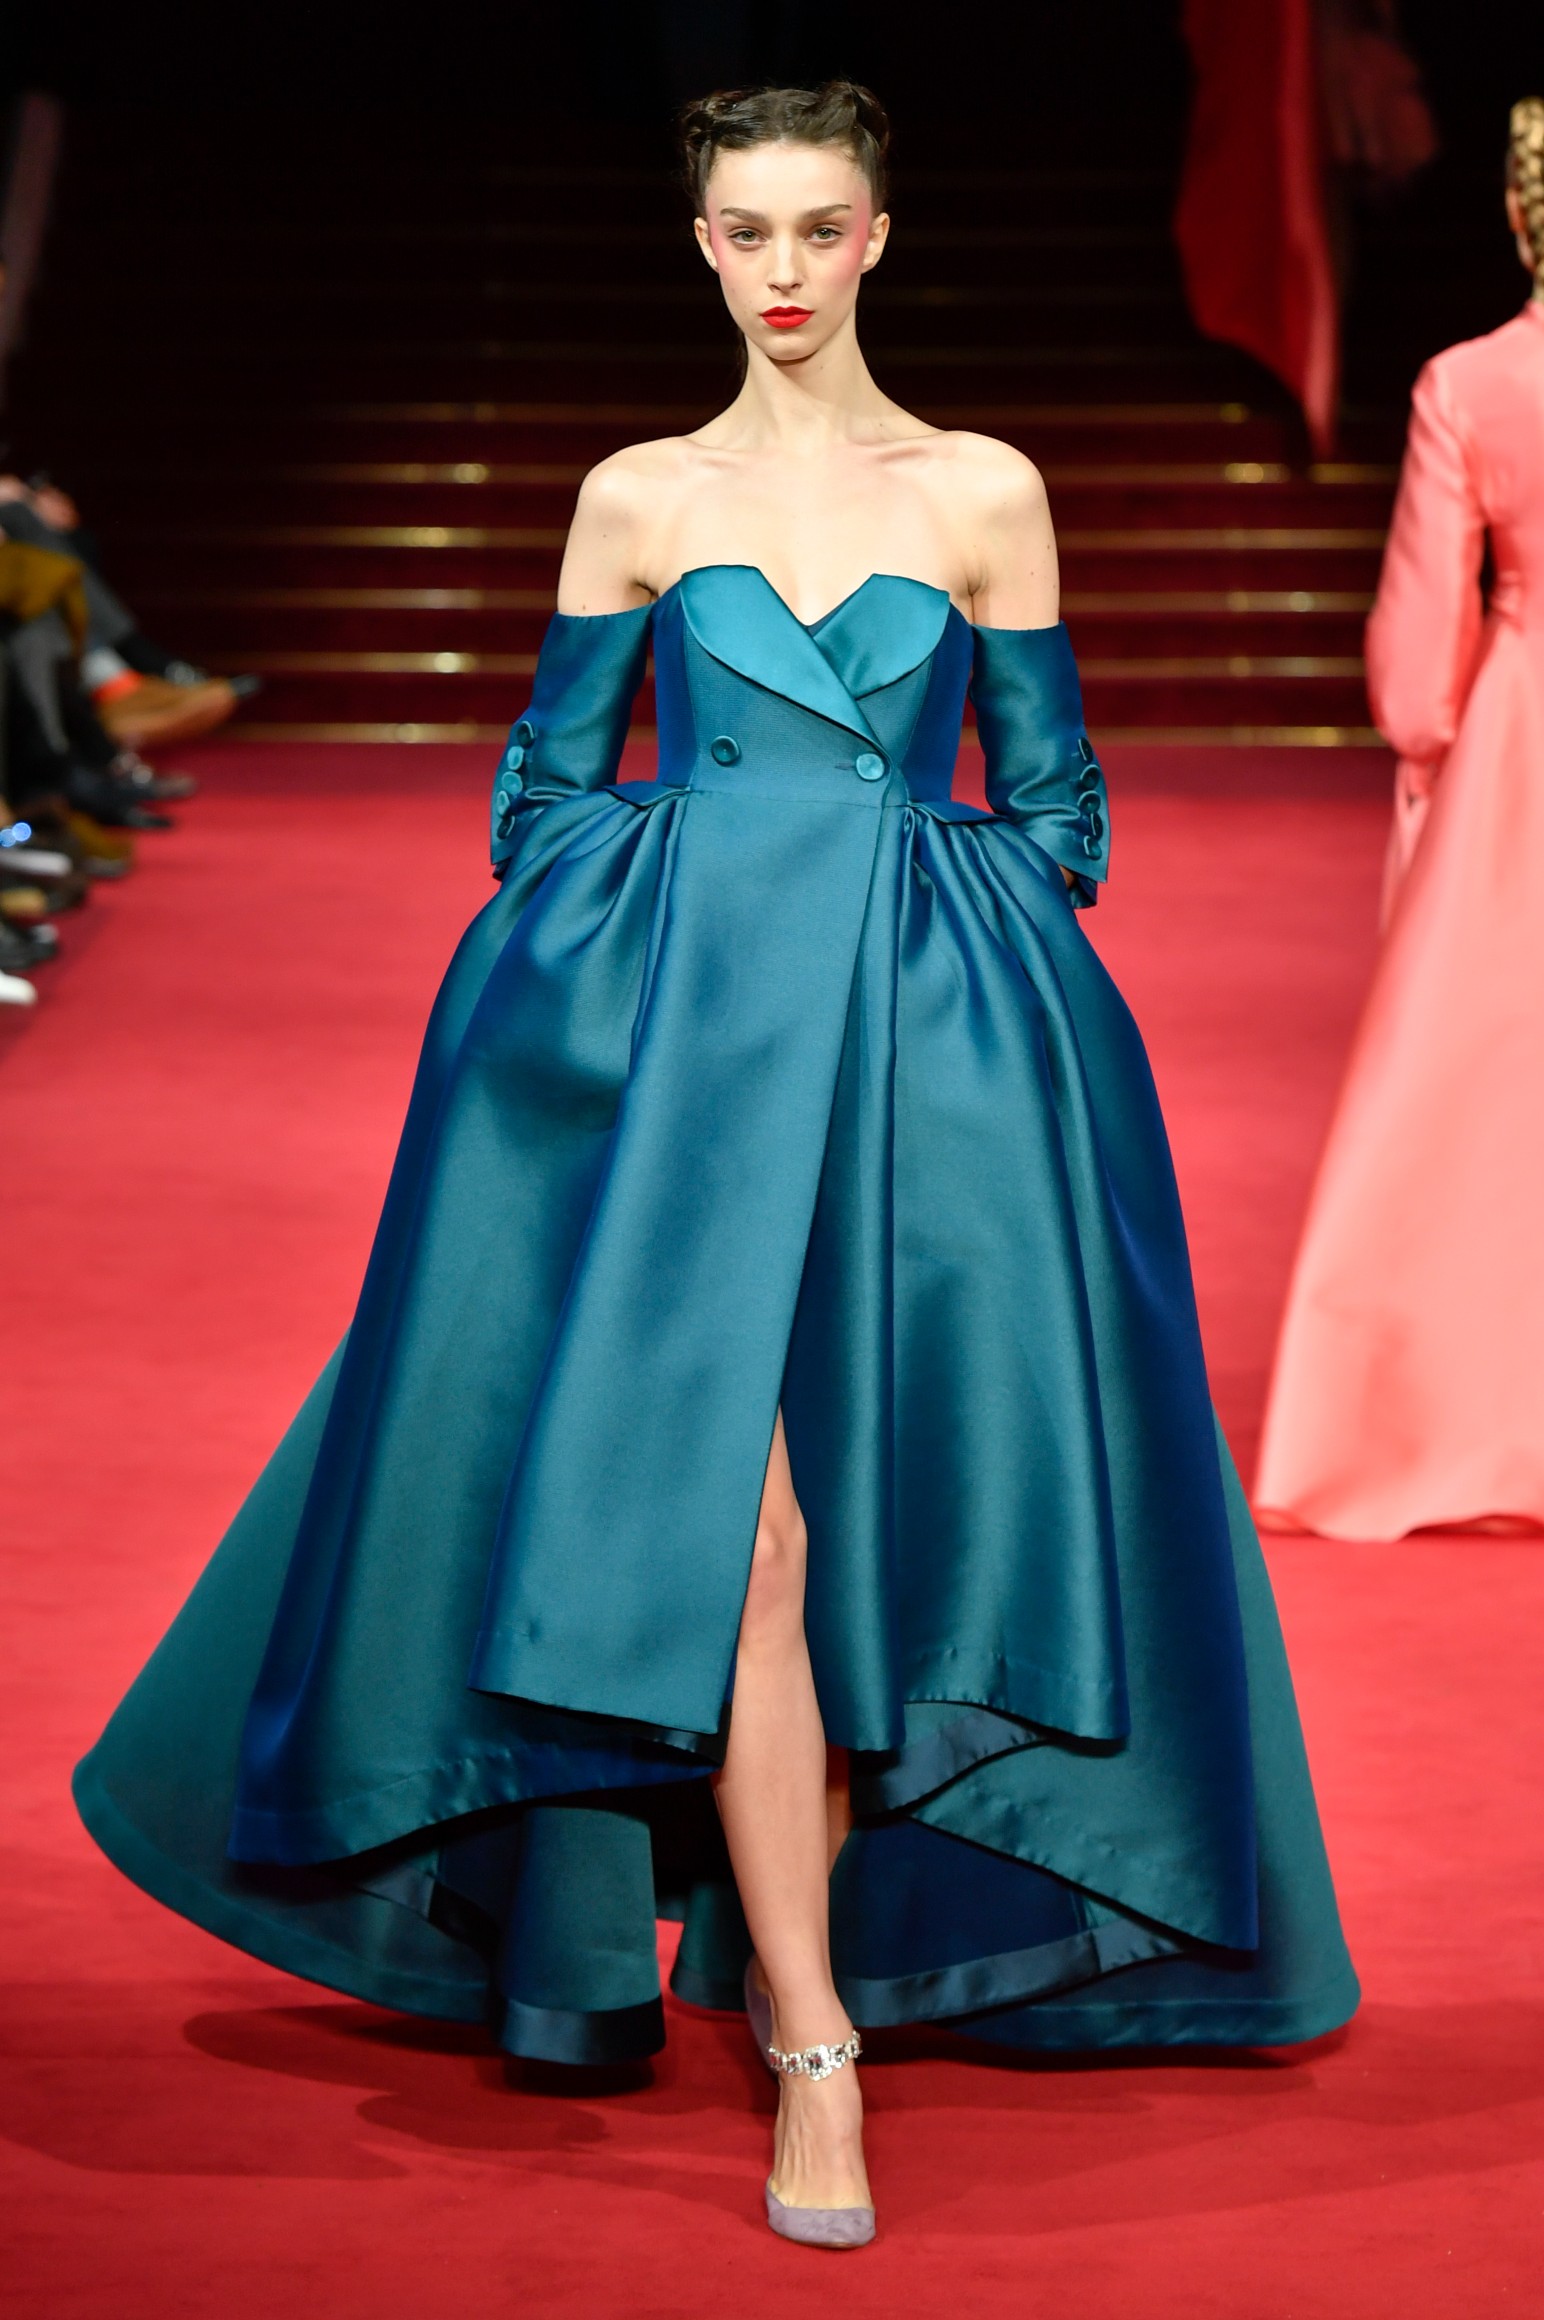 Spring 2018 Haute Couture: Alexis Mabille's Be Yourself Collection ...